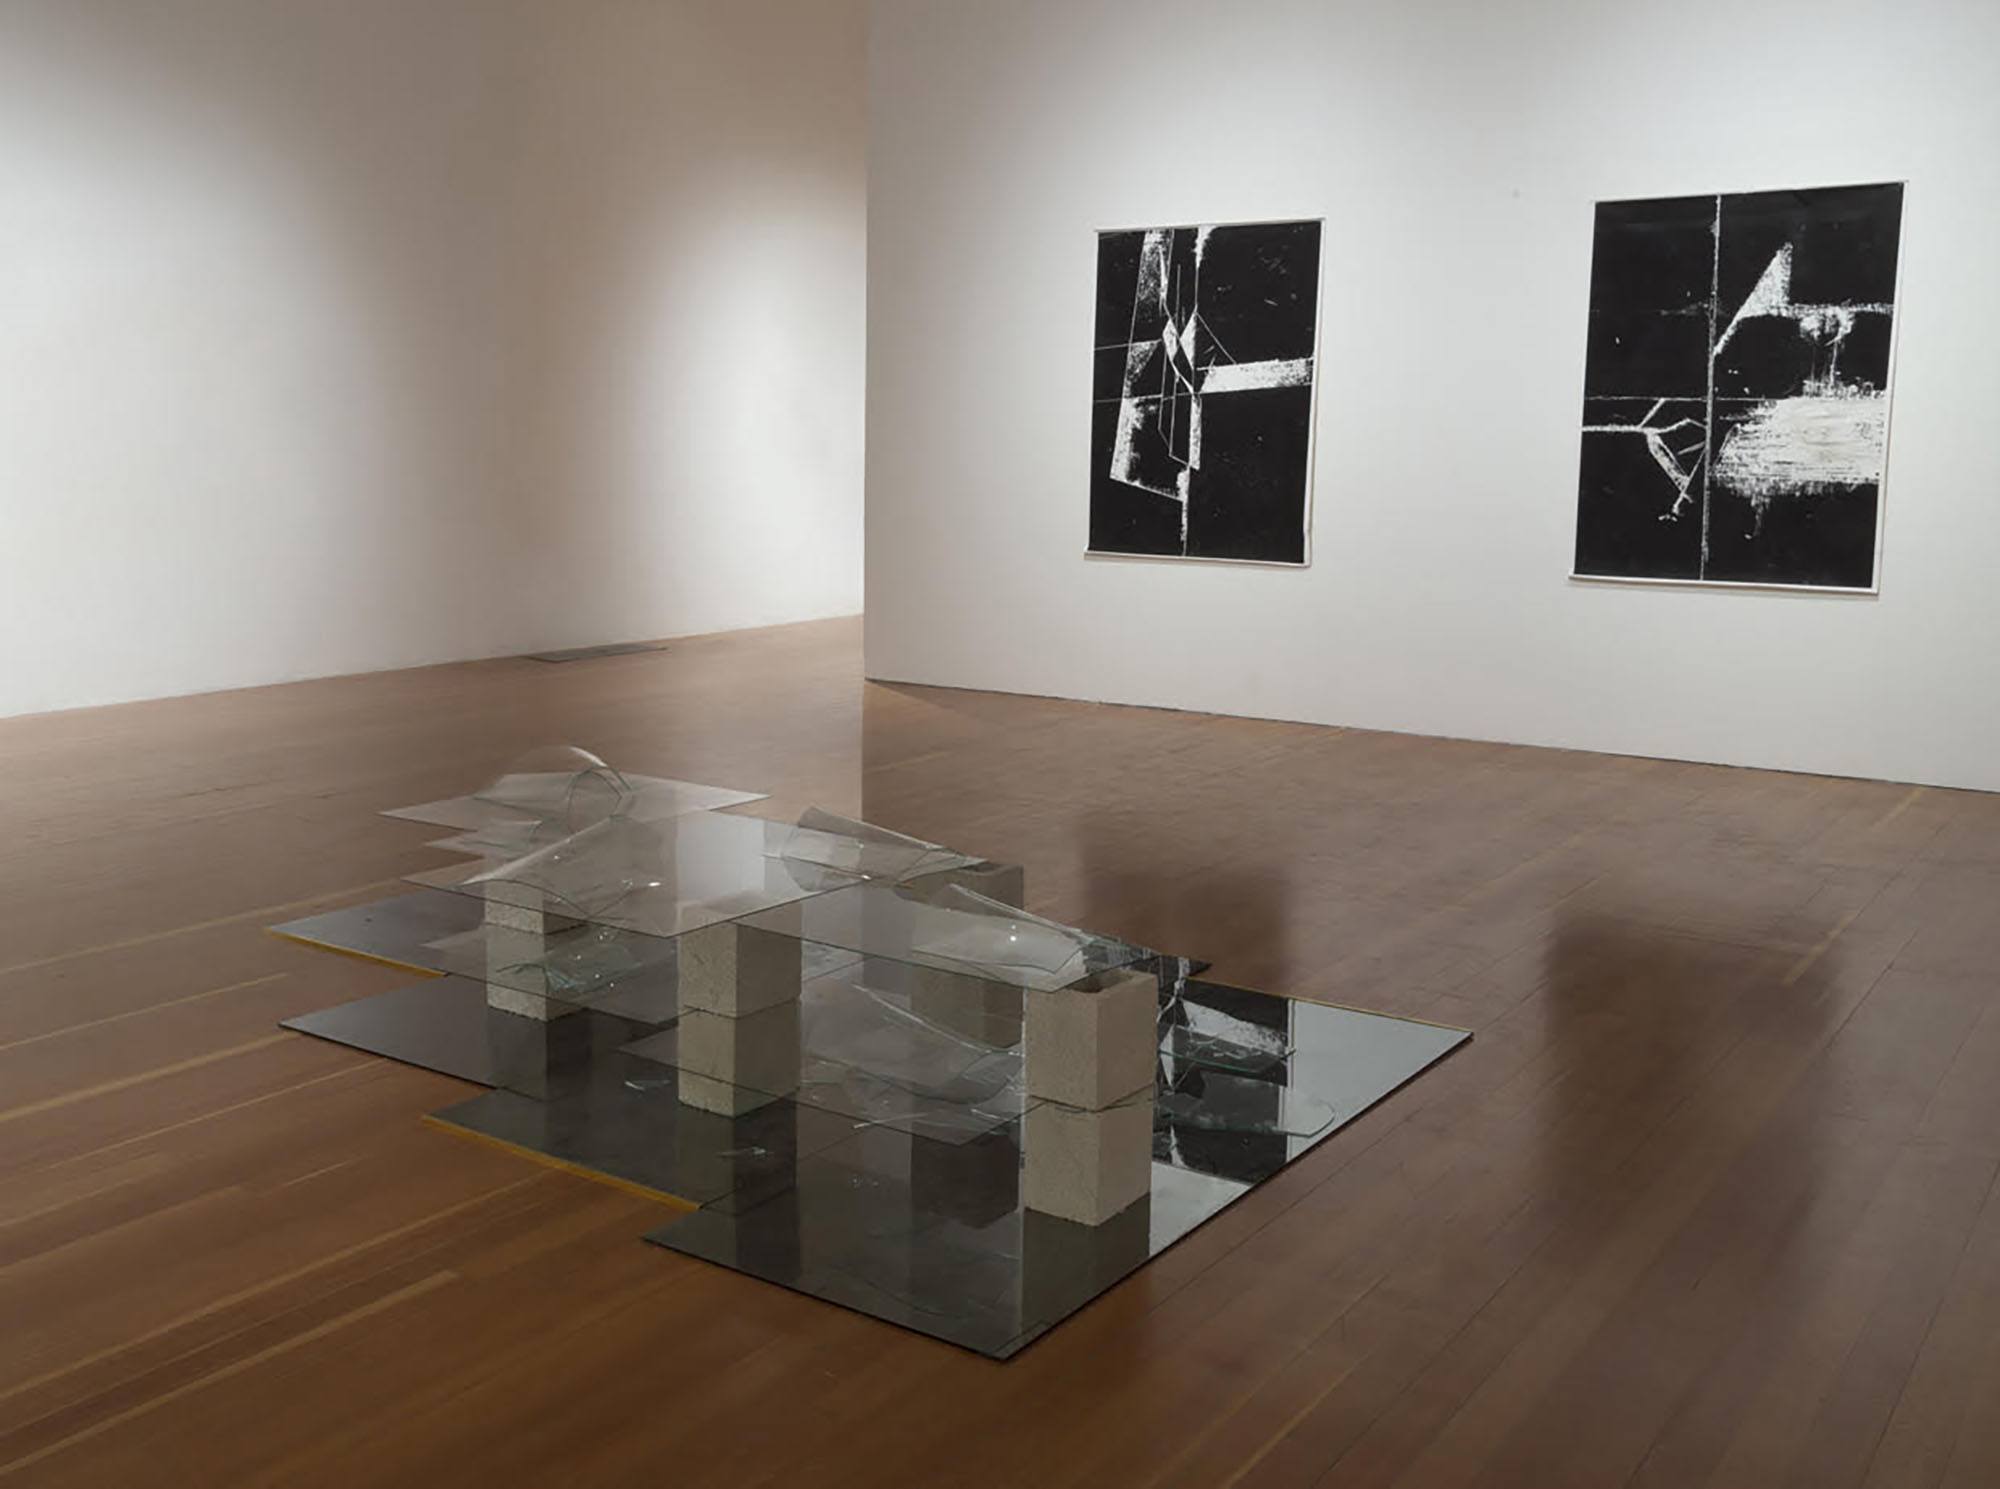 An installation view of a glass and concrete sculpture with two framed black and white images in the background